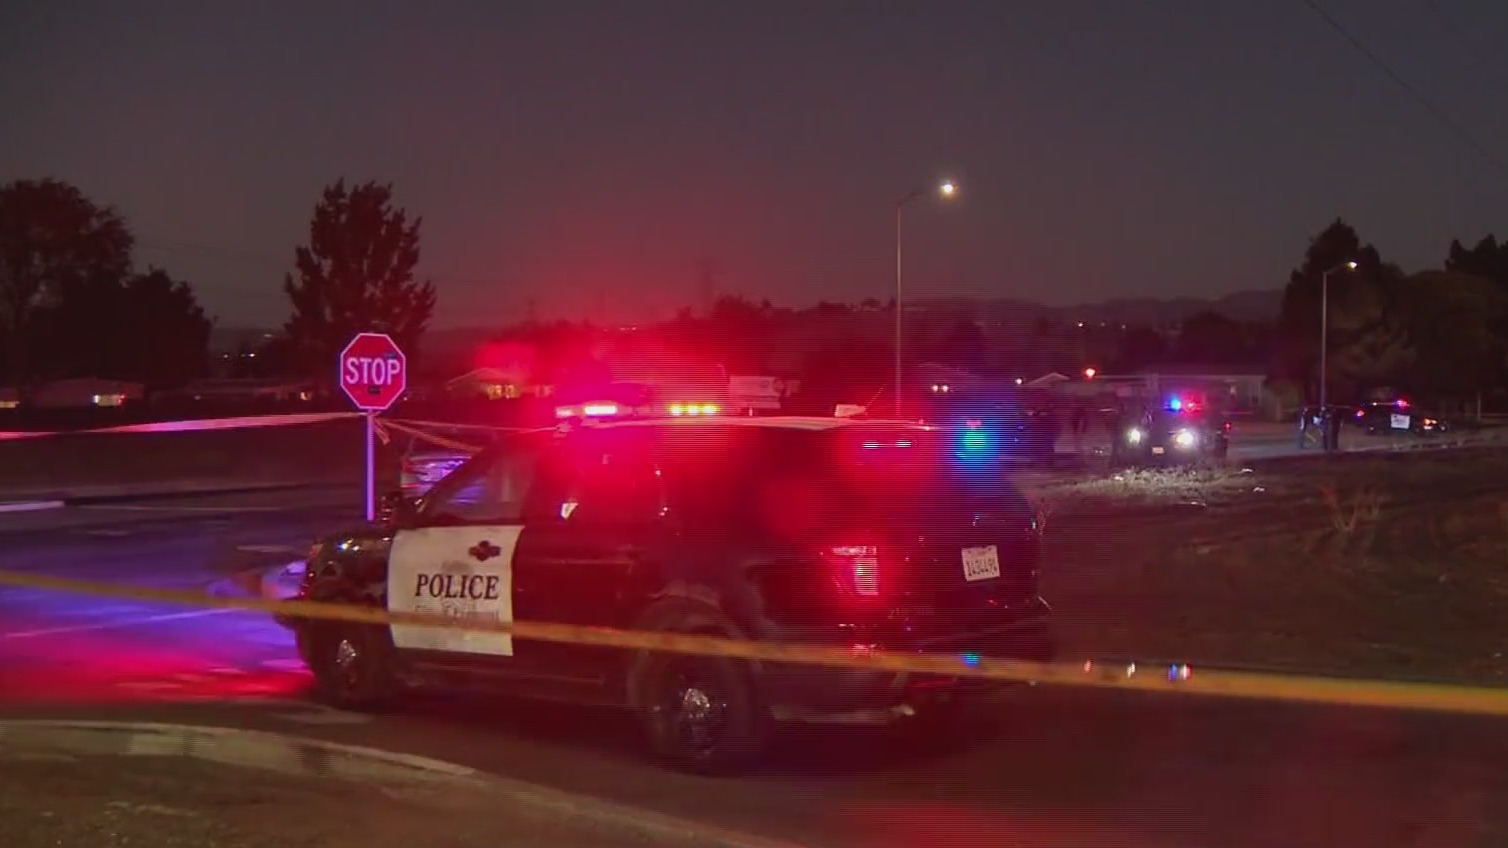 Fremont police on the scene of a fatal police shooting near the Southlake Mobile Home Park on August 25, 2021. (CBS)